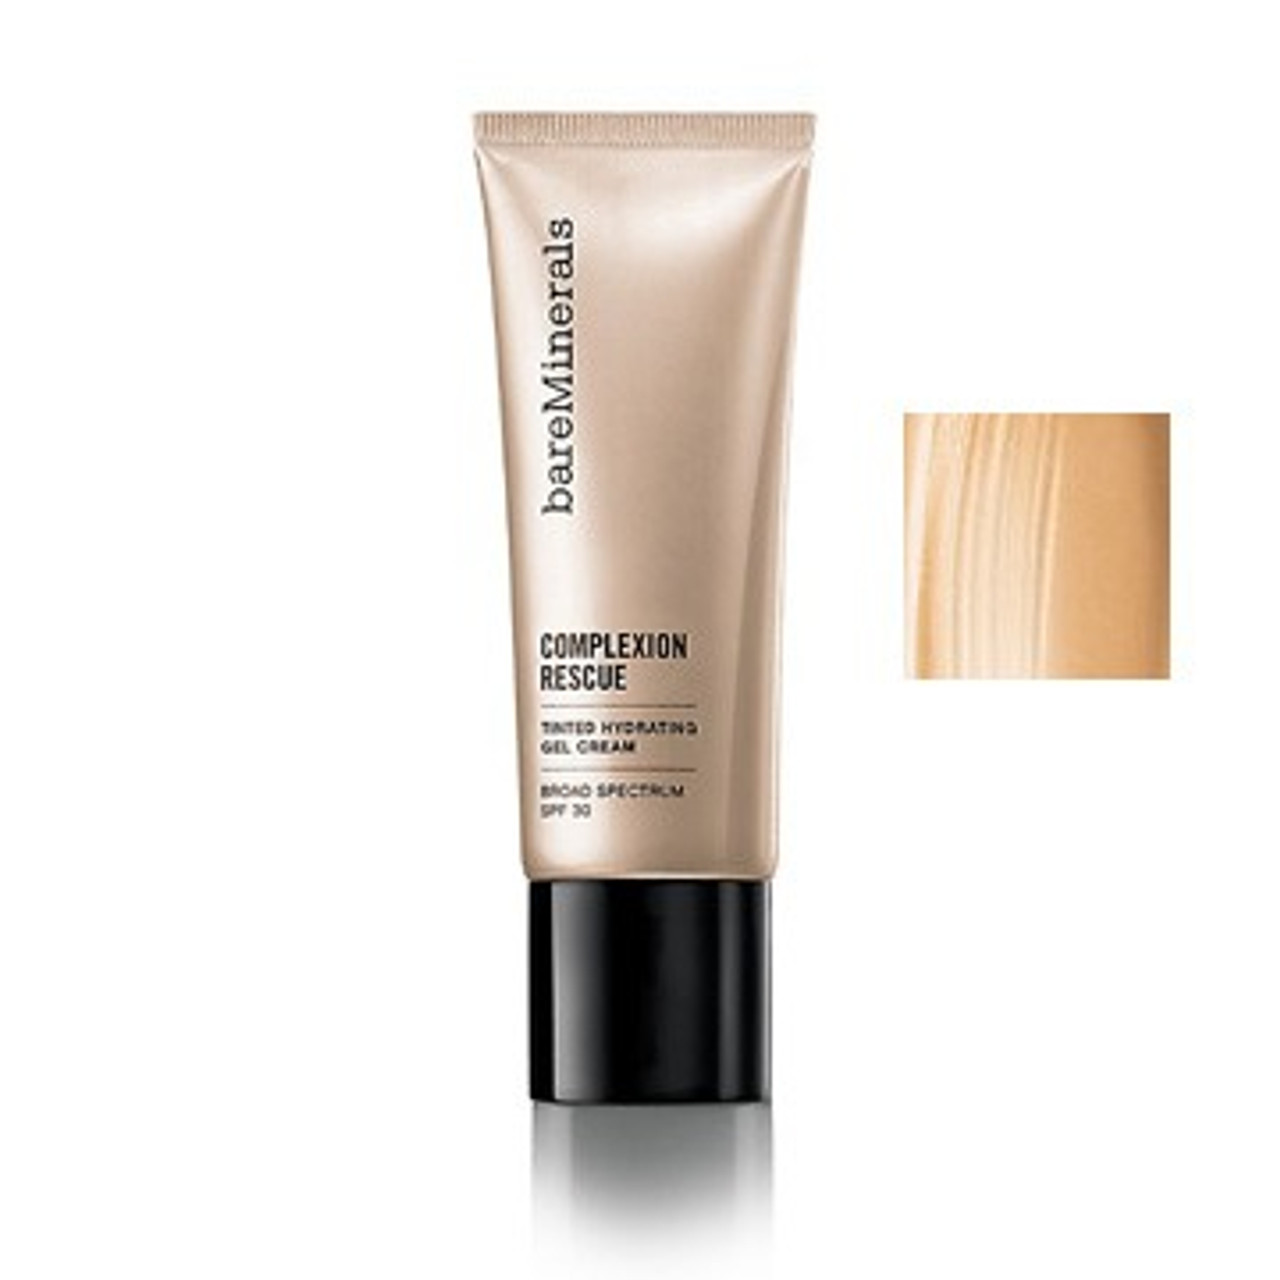 BareMinerals Complexion Rescue Tinted Hydrating Gel Cream SPF 30 - 1.18 oz - Ginger 06